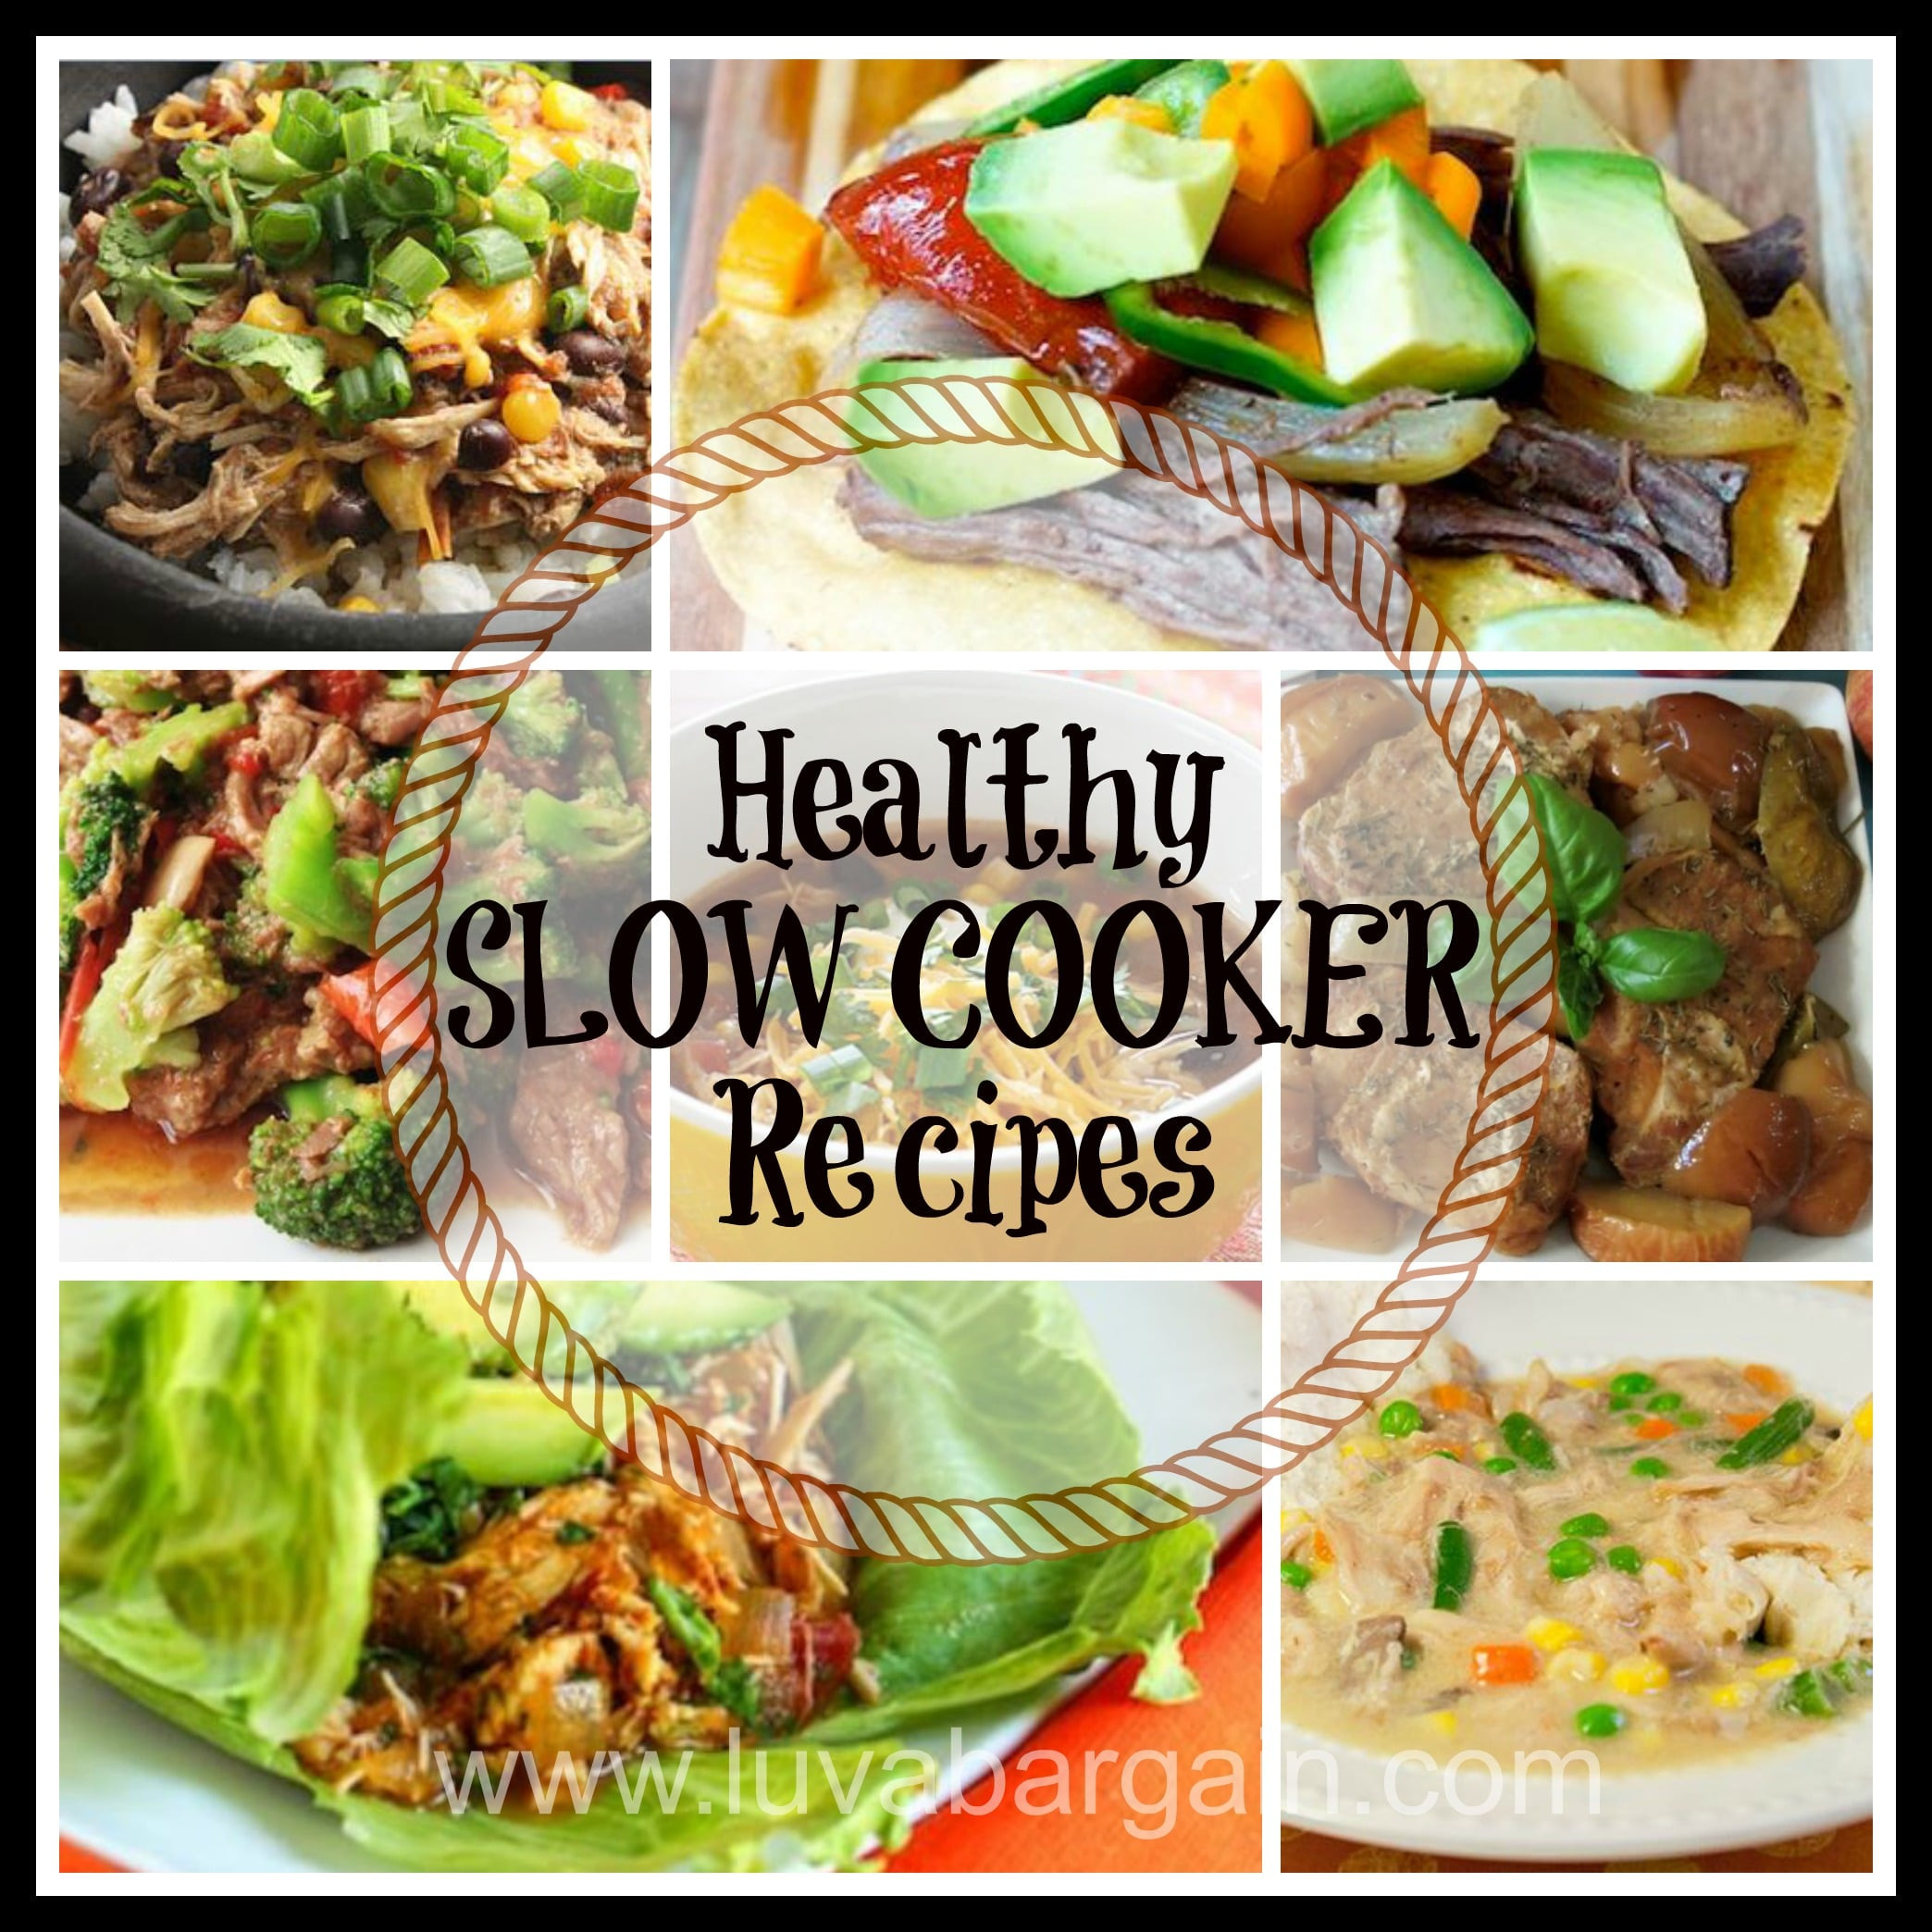 Slow Cooker Recipes Healthy
 Healthy Slow Cooker Recipes